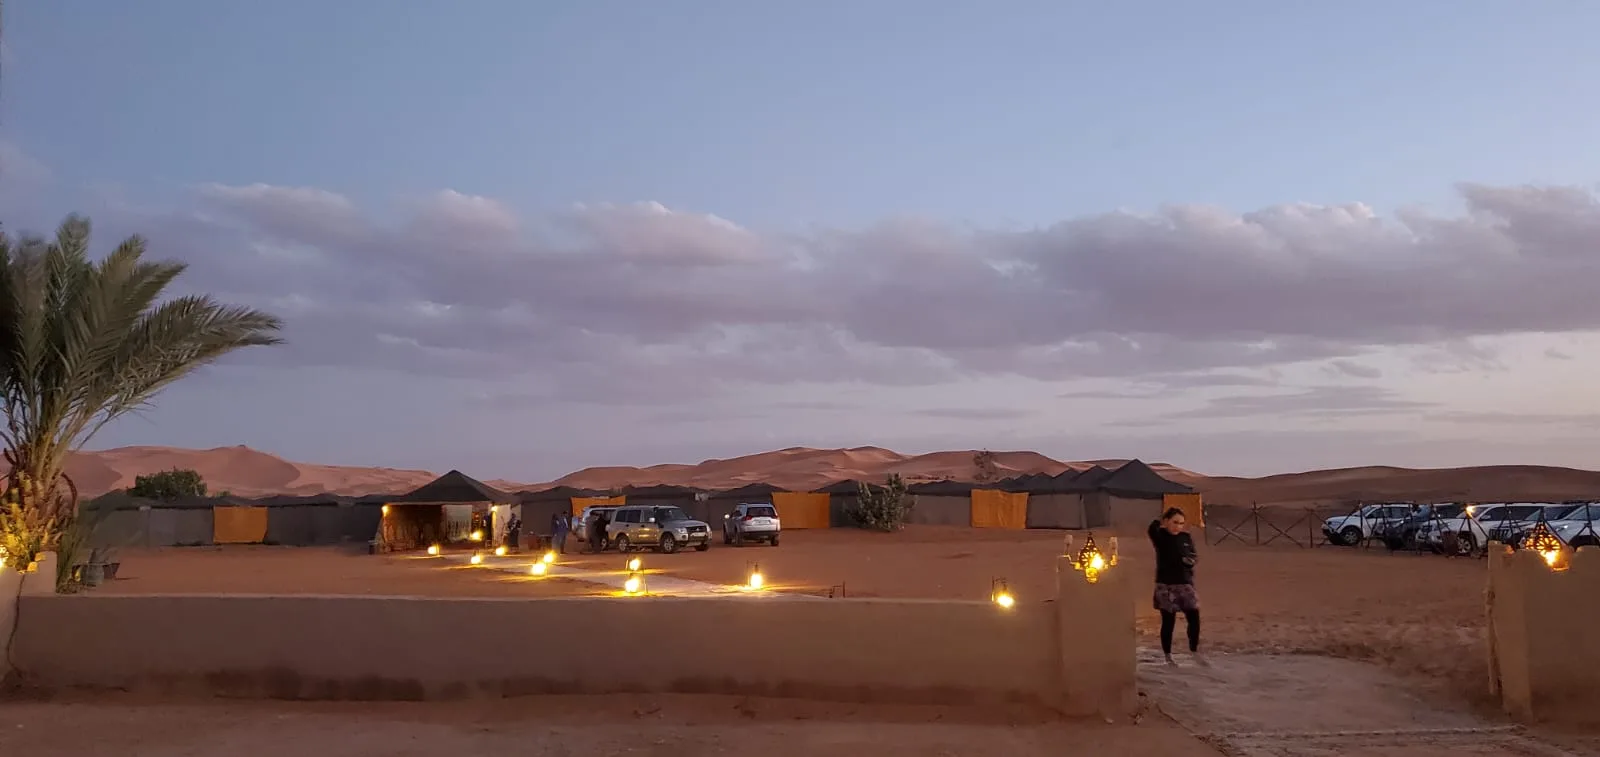 Real traveller photo of tent camp in desert